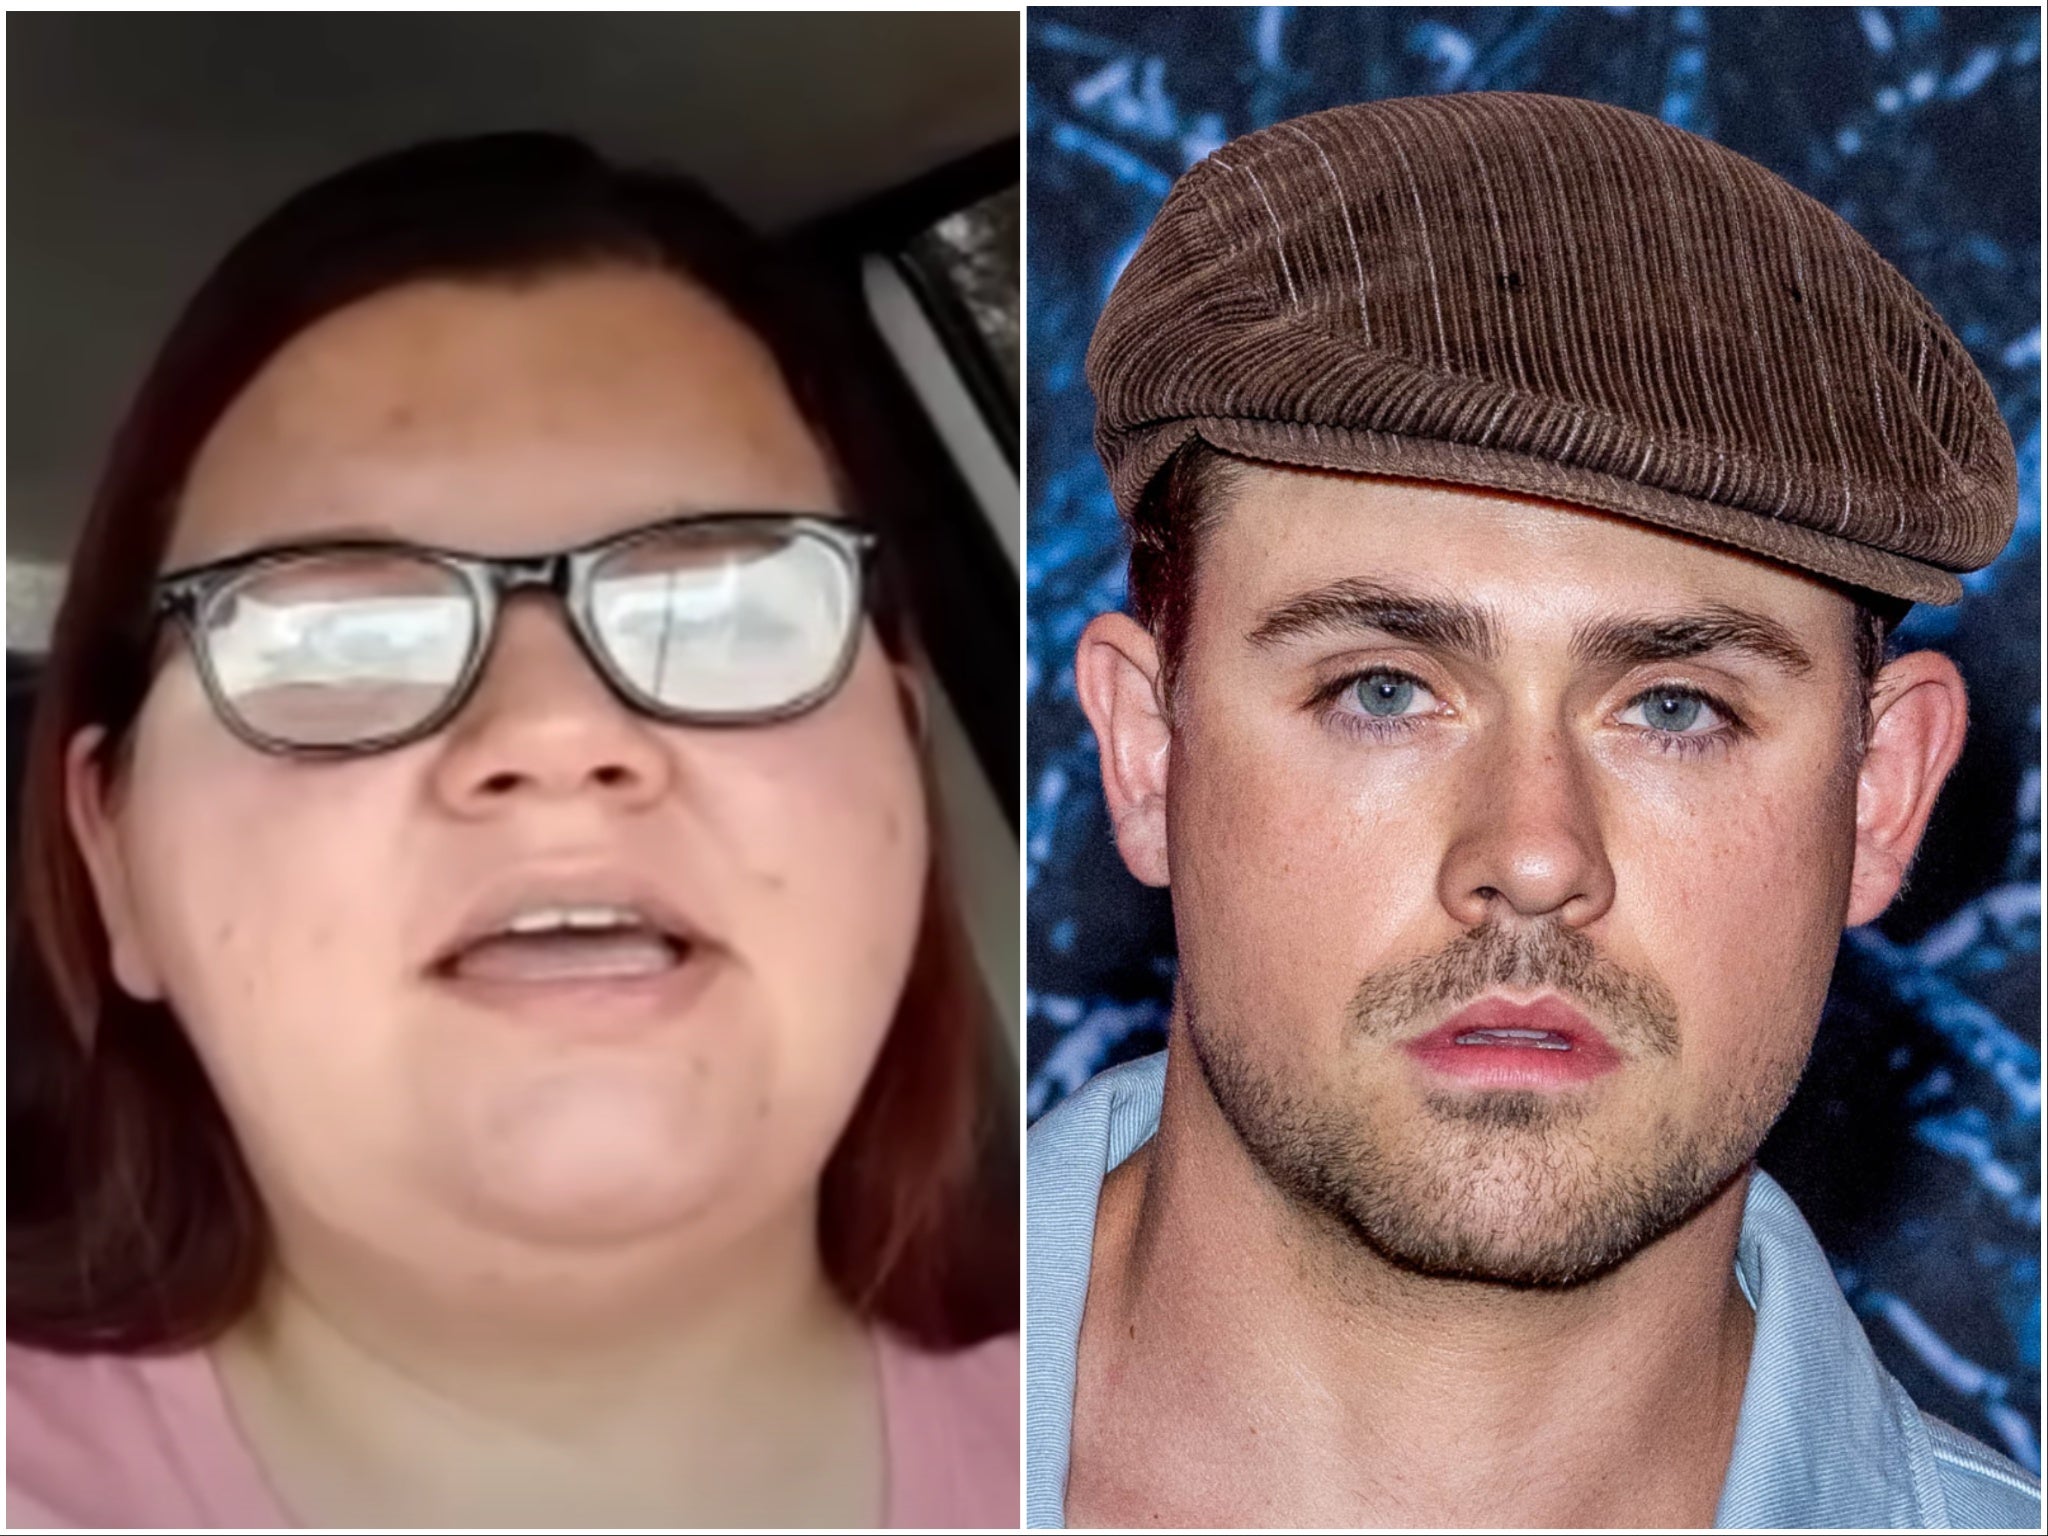 Woman claims she divorced her husband and sent $10,000 to catfish posing as Stranger Things star The Independent